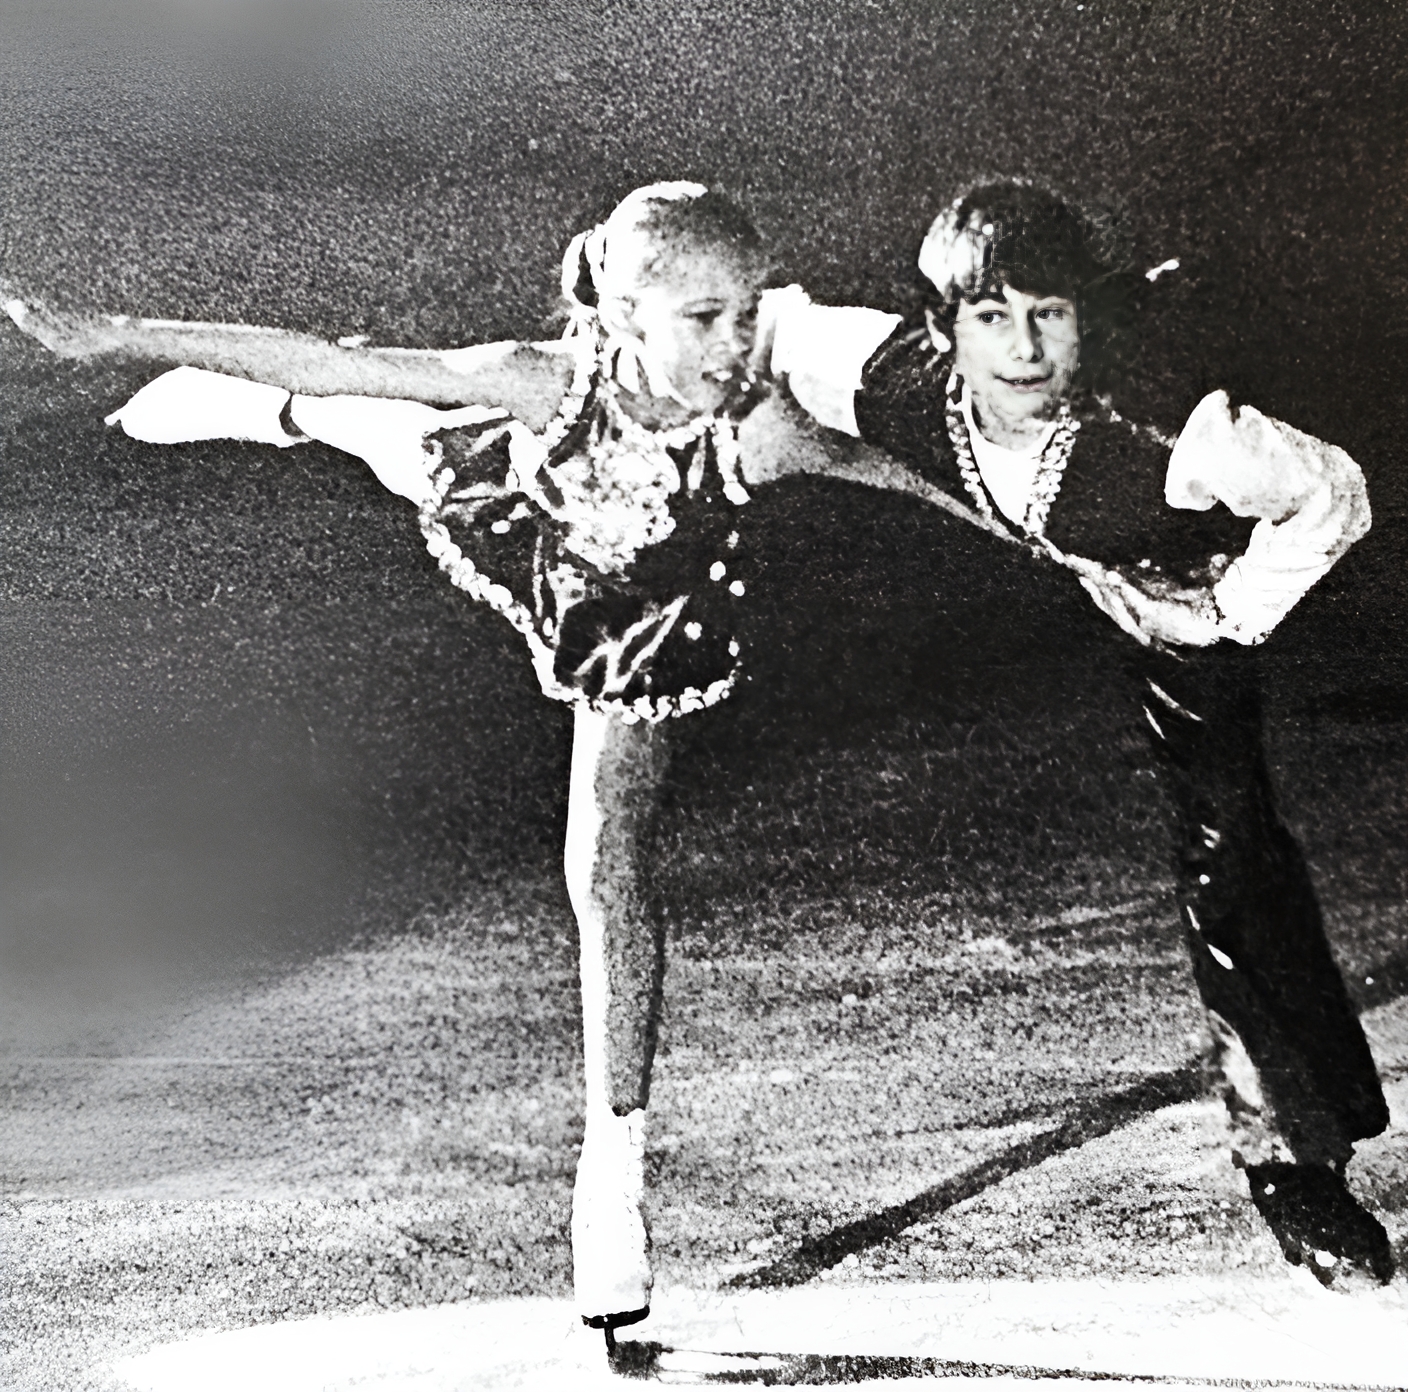 Two child figure skaters, one girl with a blond ponytail, and one boy with dark, short hair, glide on the ice together in a black and white image.